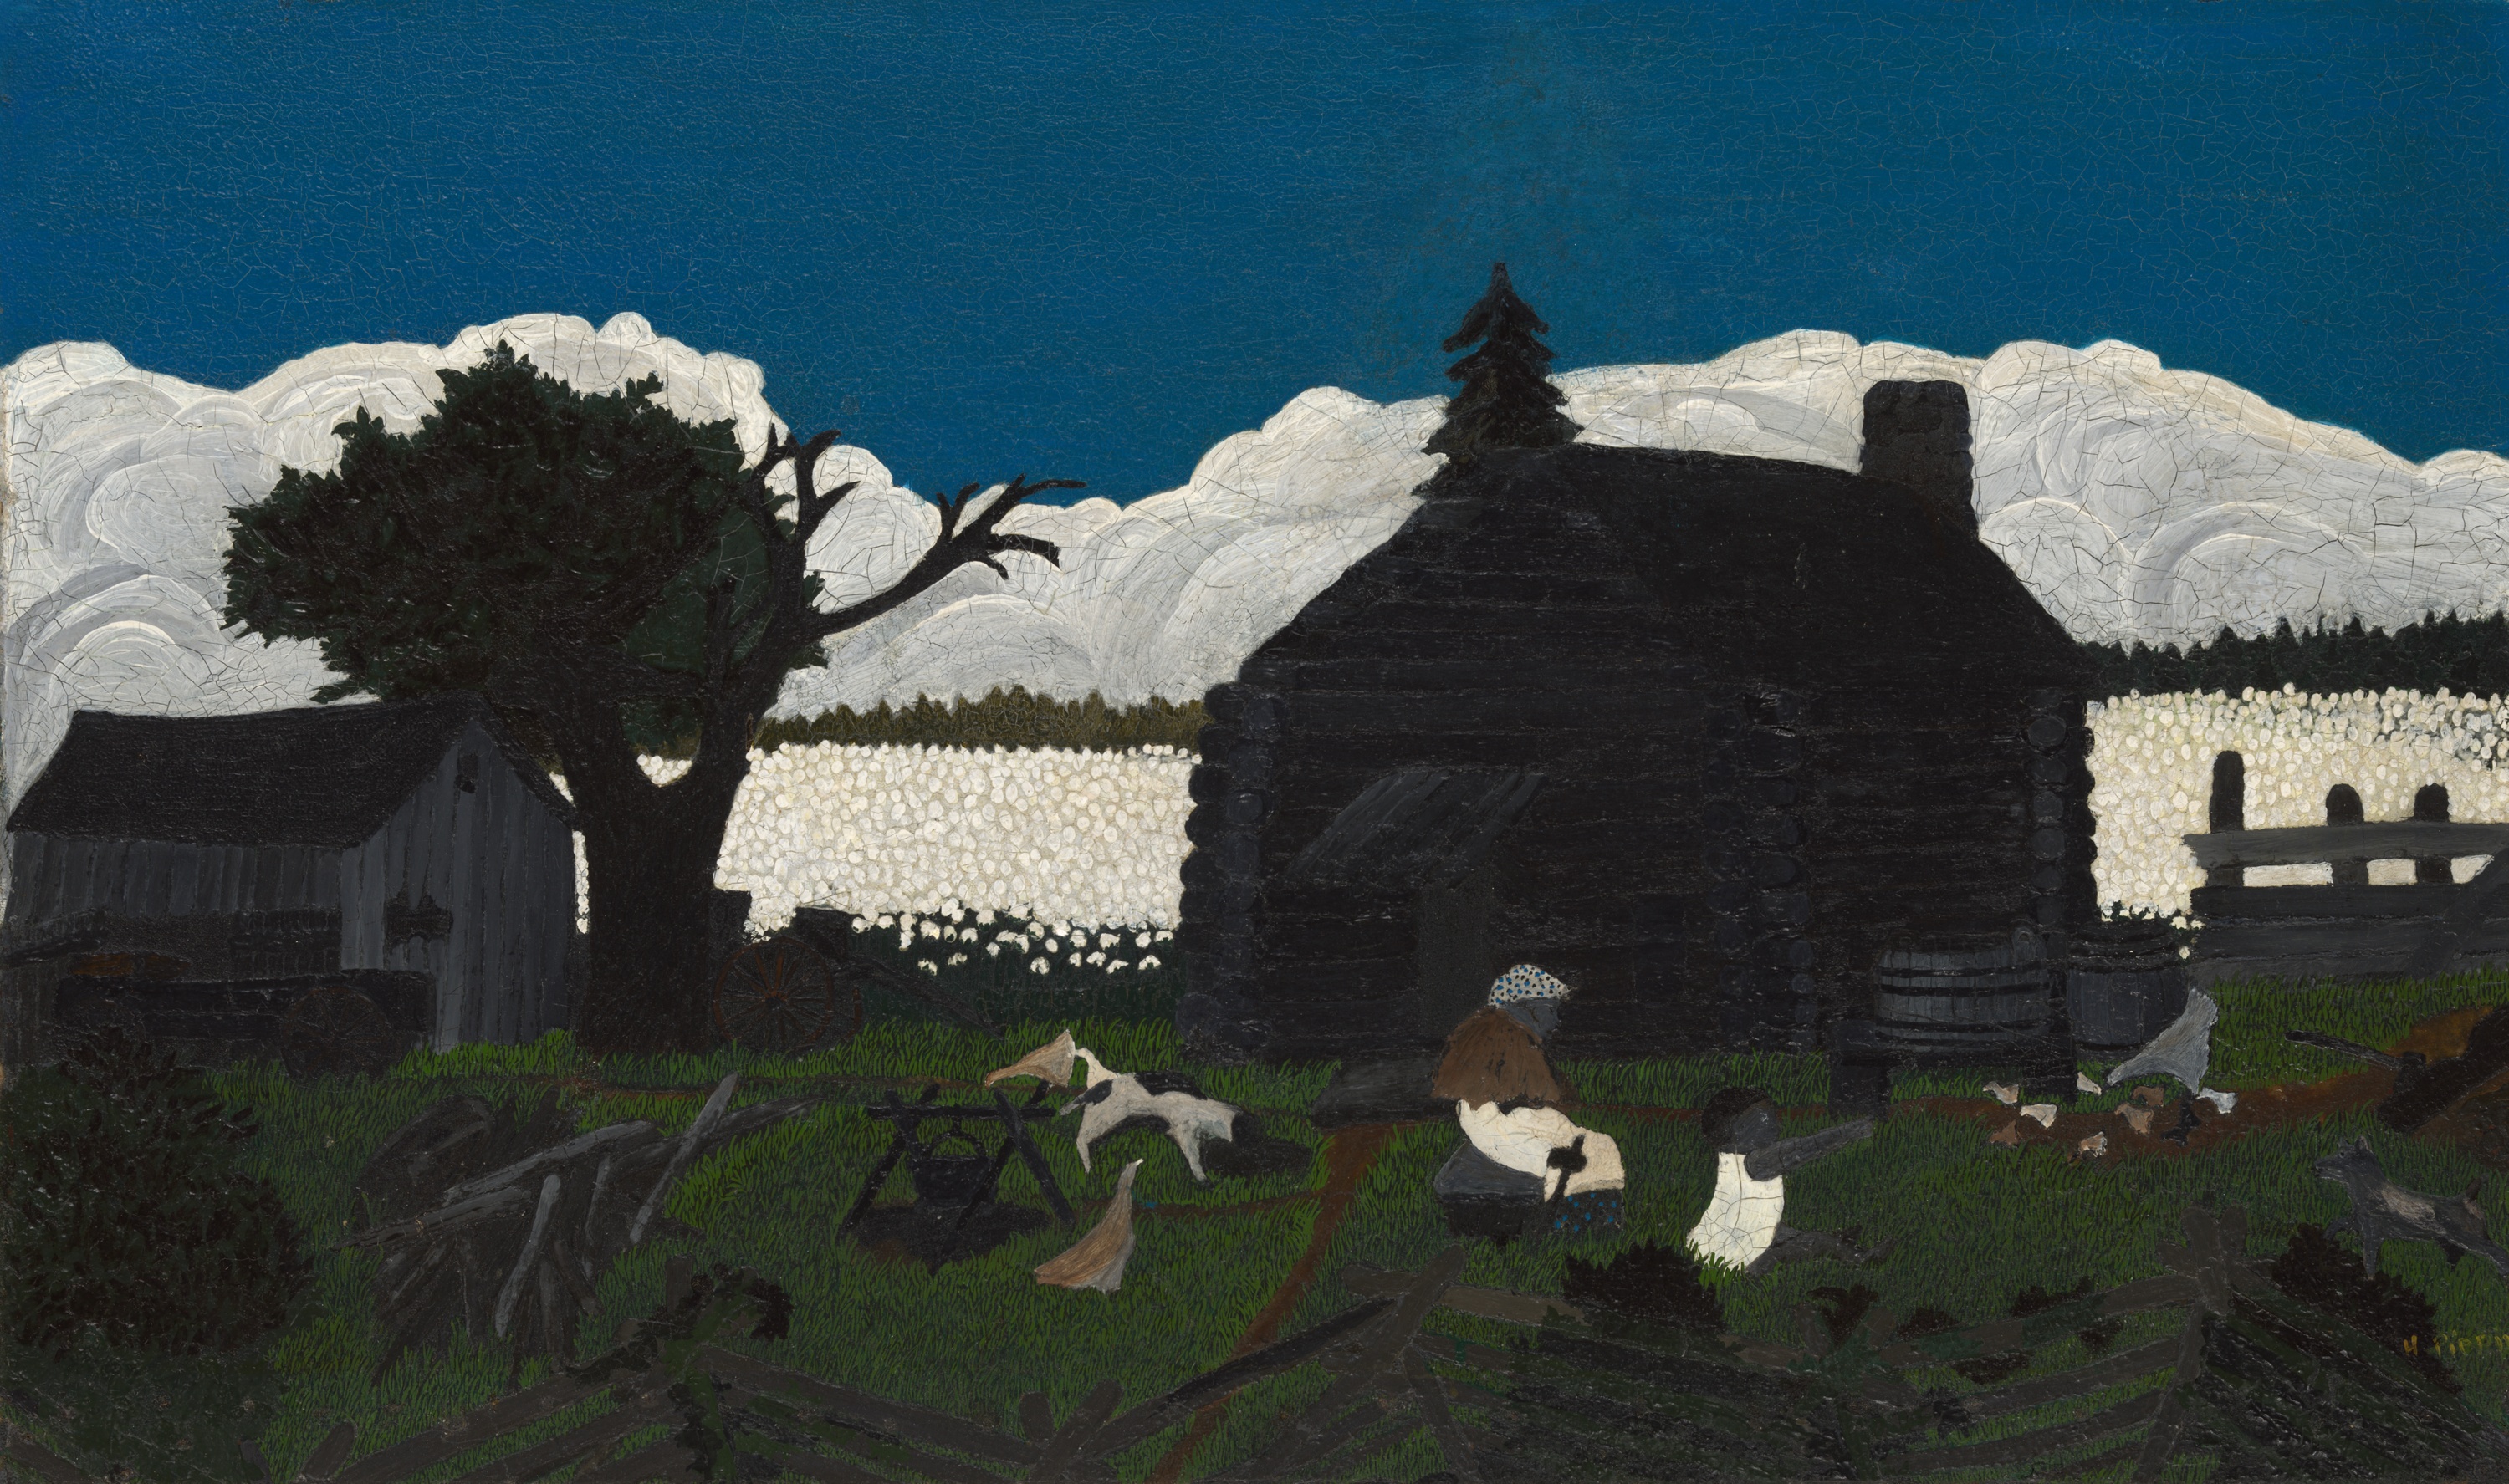 Хижина среди хлопка (Cabin in the Cotton) by Horace Pippin - Около 1931–37 - 51 × 85 см 